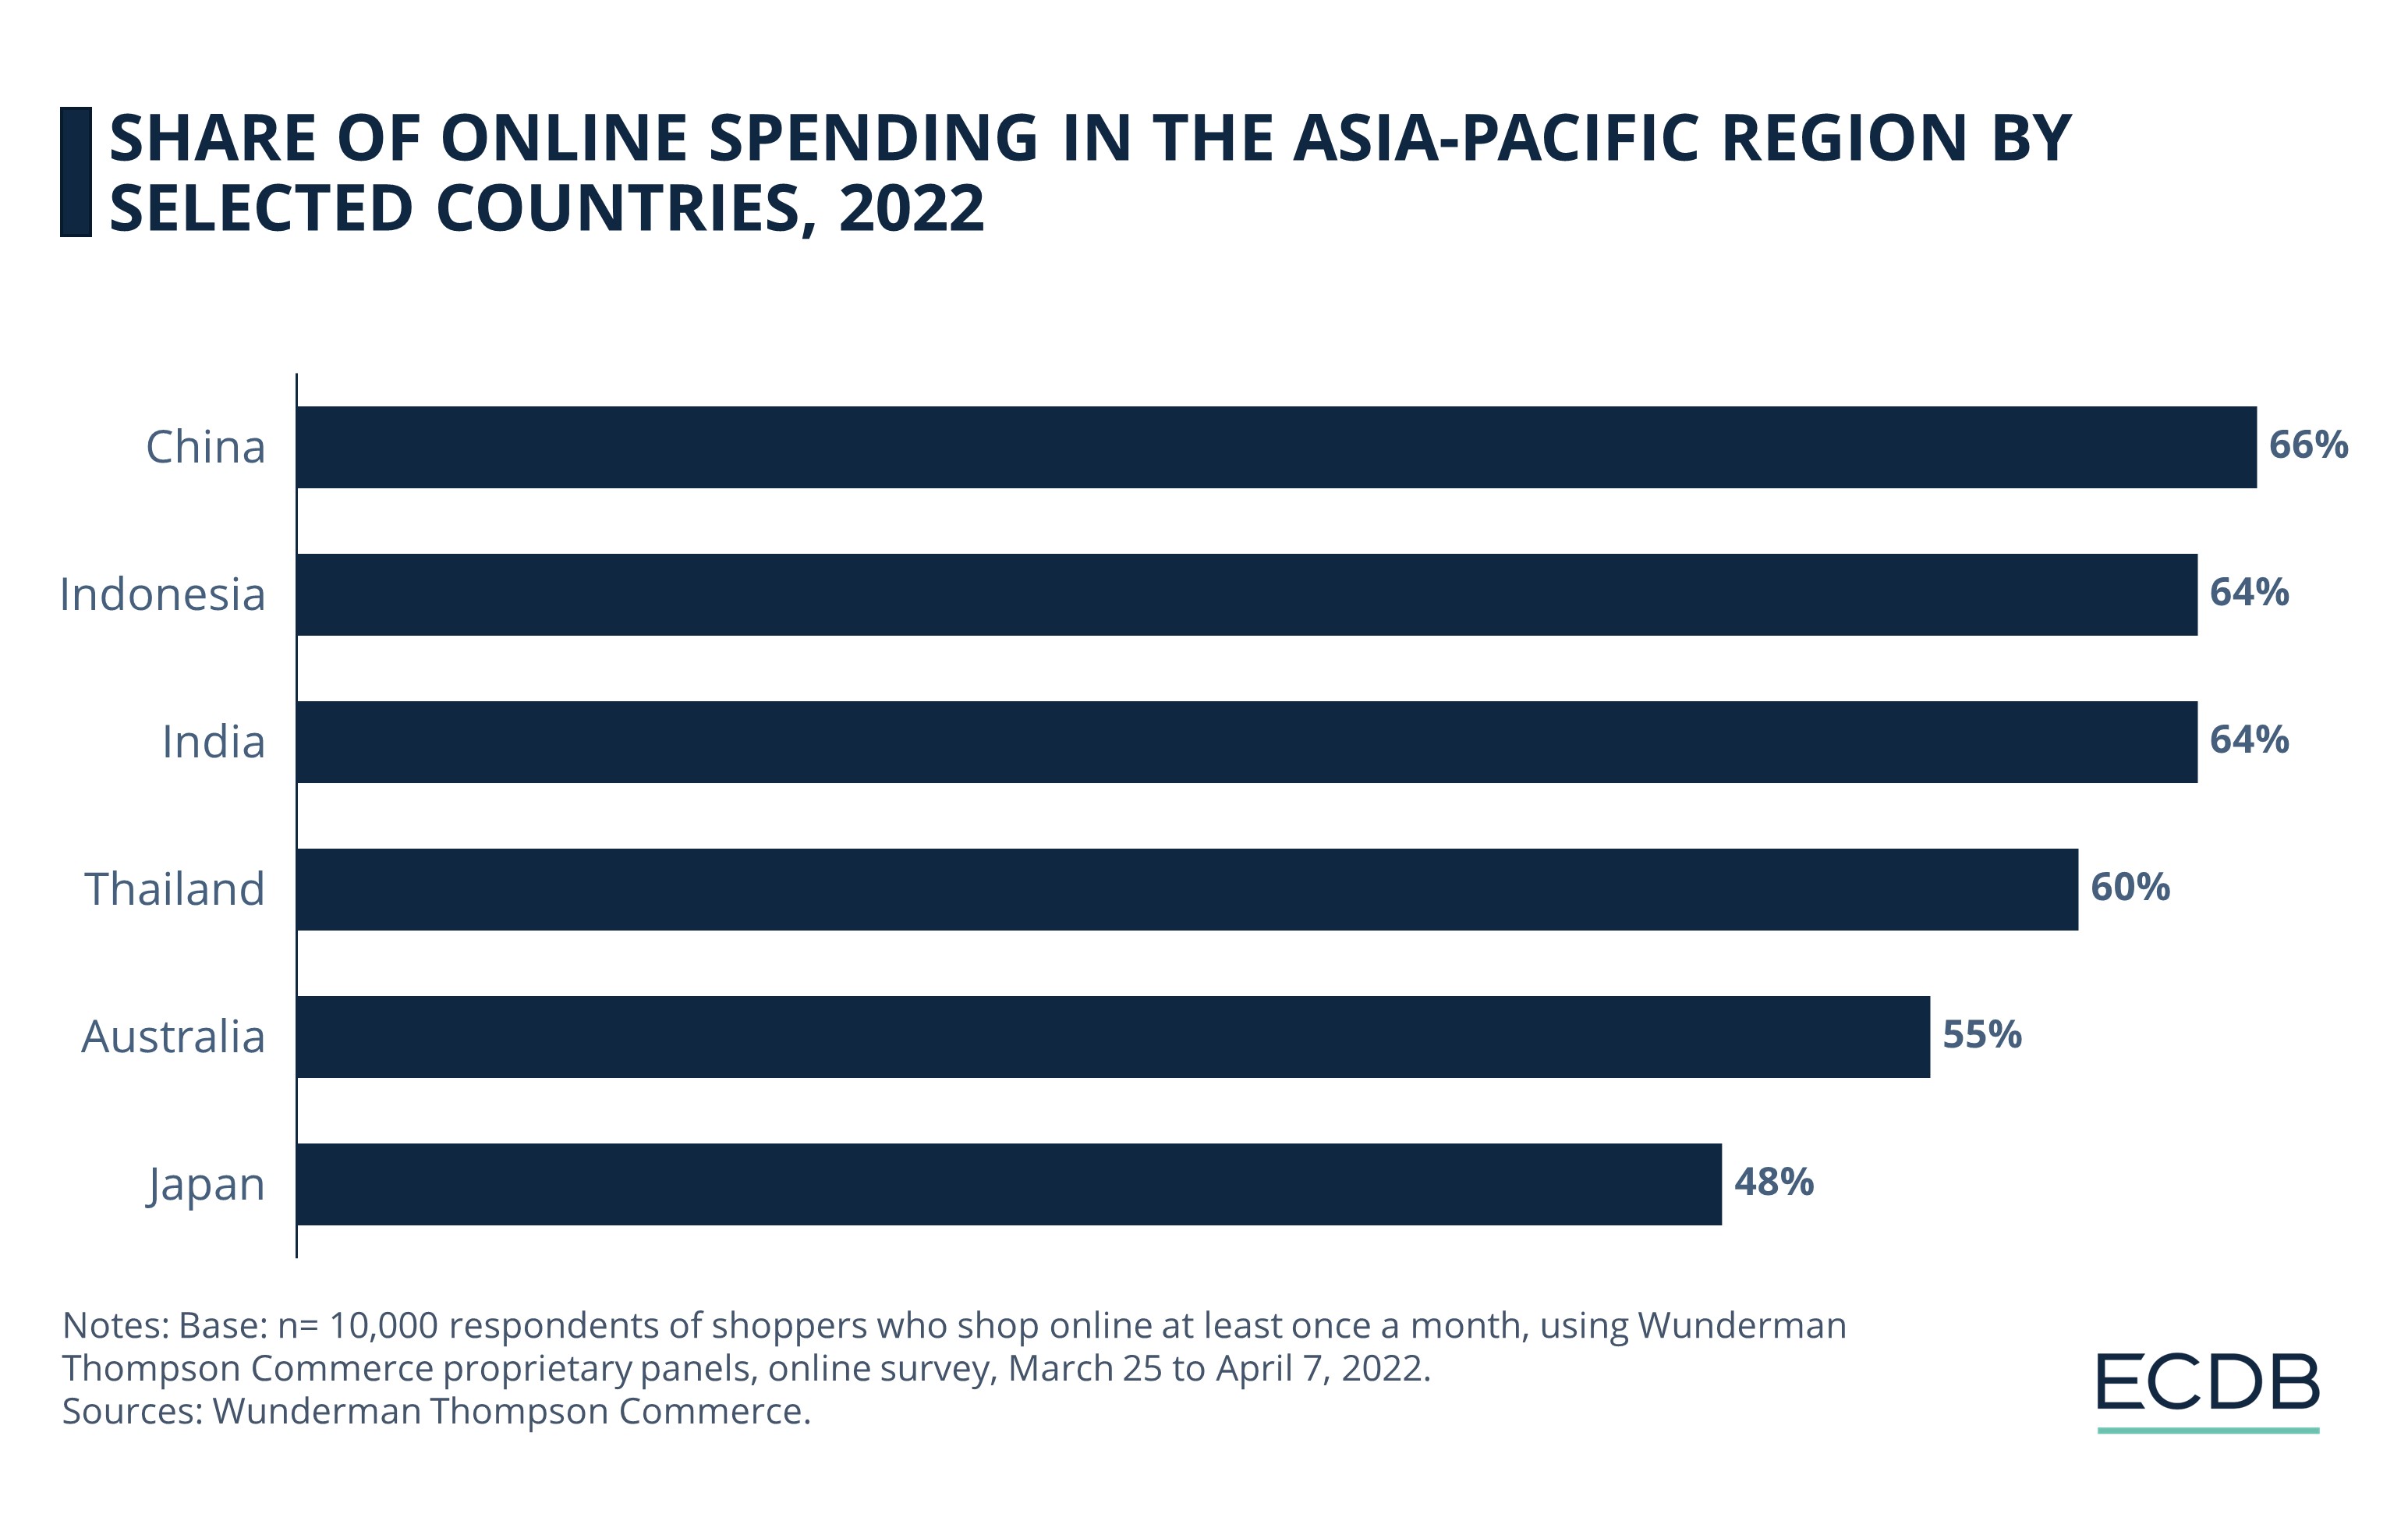 Share of Online Spending in the Asia-Pacific Region by Selected Countries, 2022